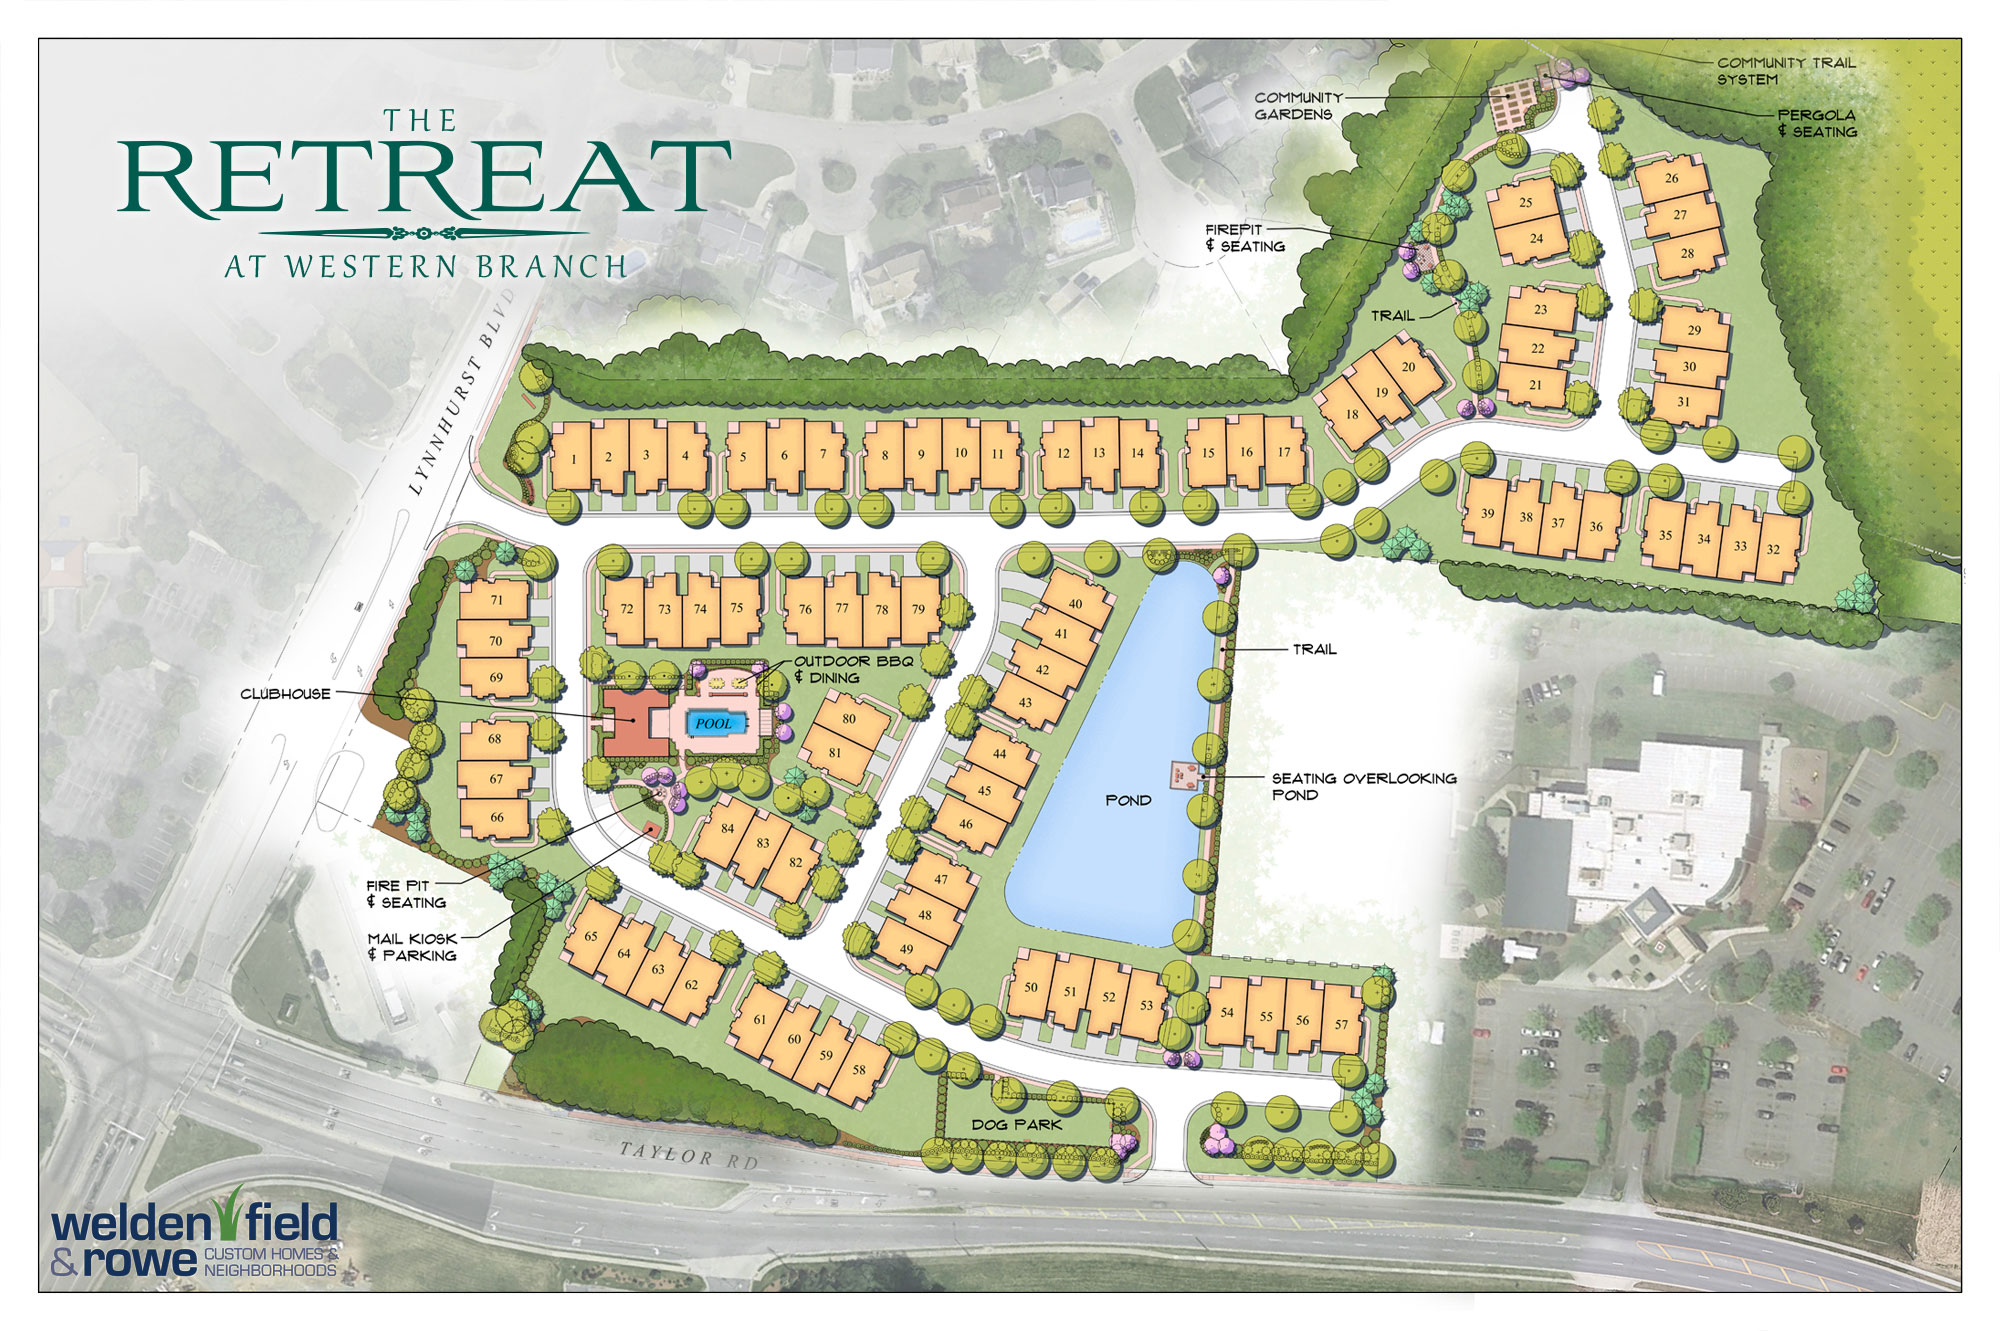 The Retreat at Western Branch Site plan